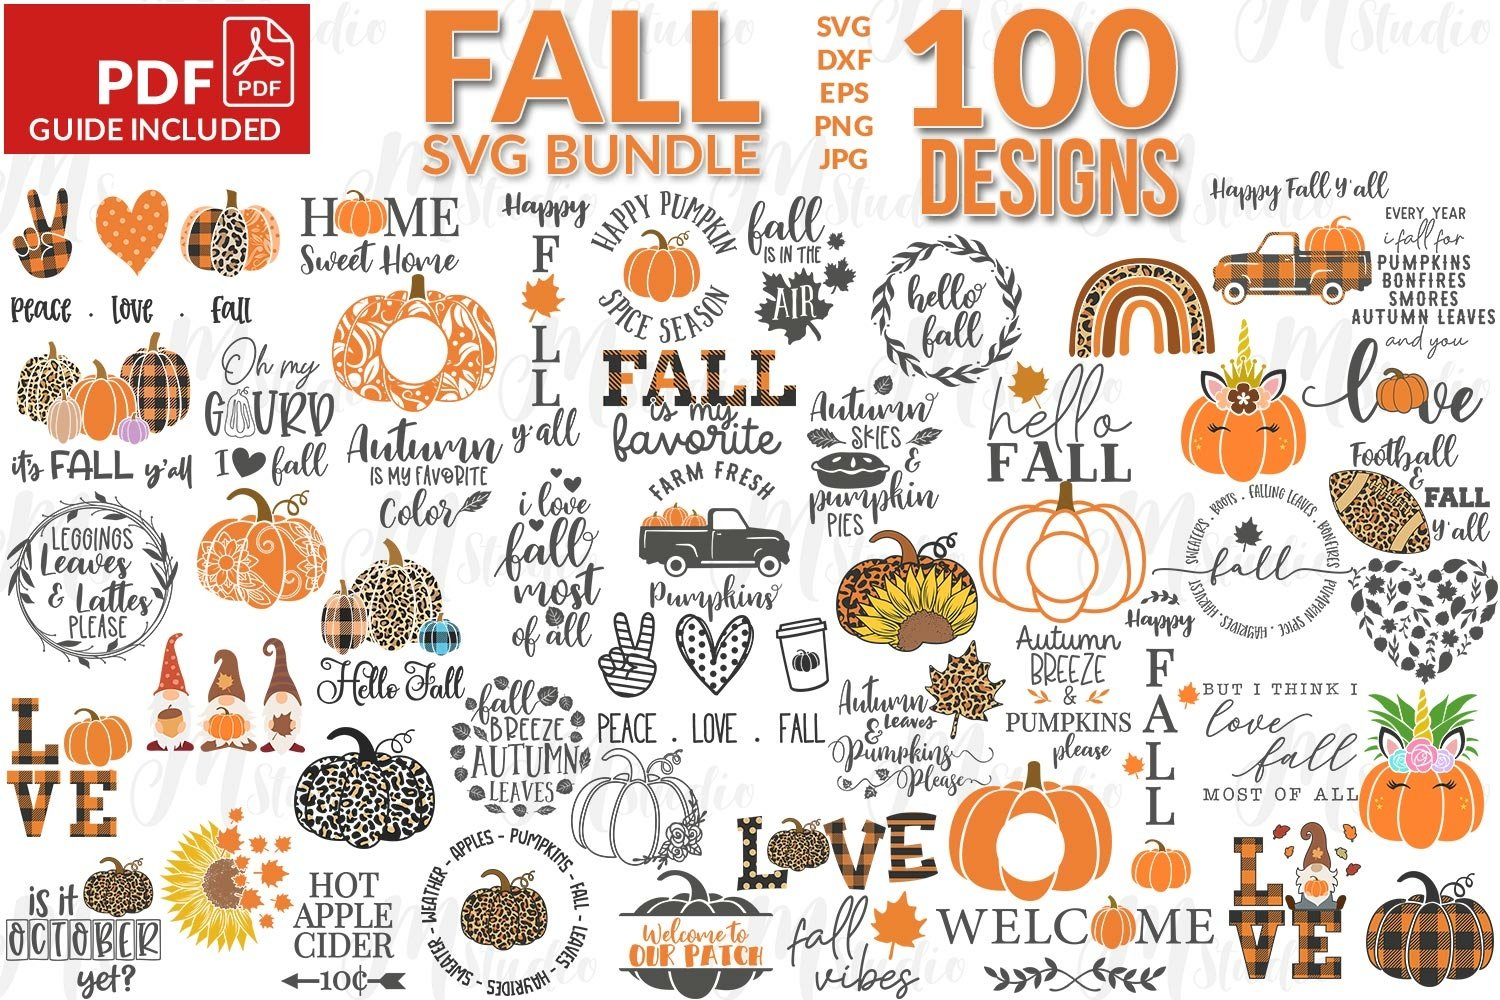 Cover image of Fall SVG Bundle.